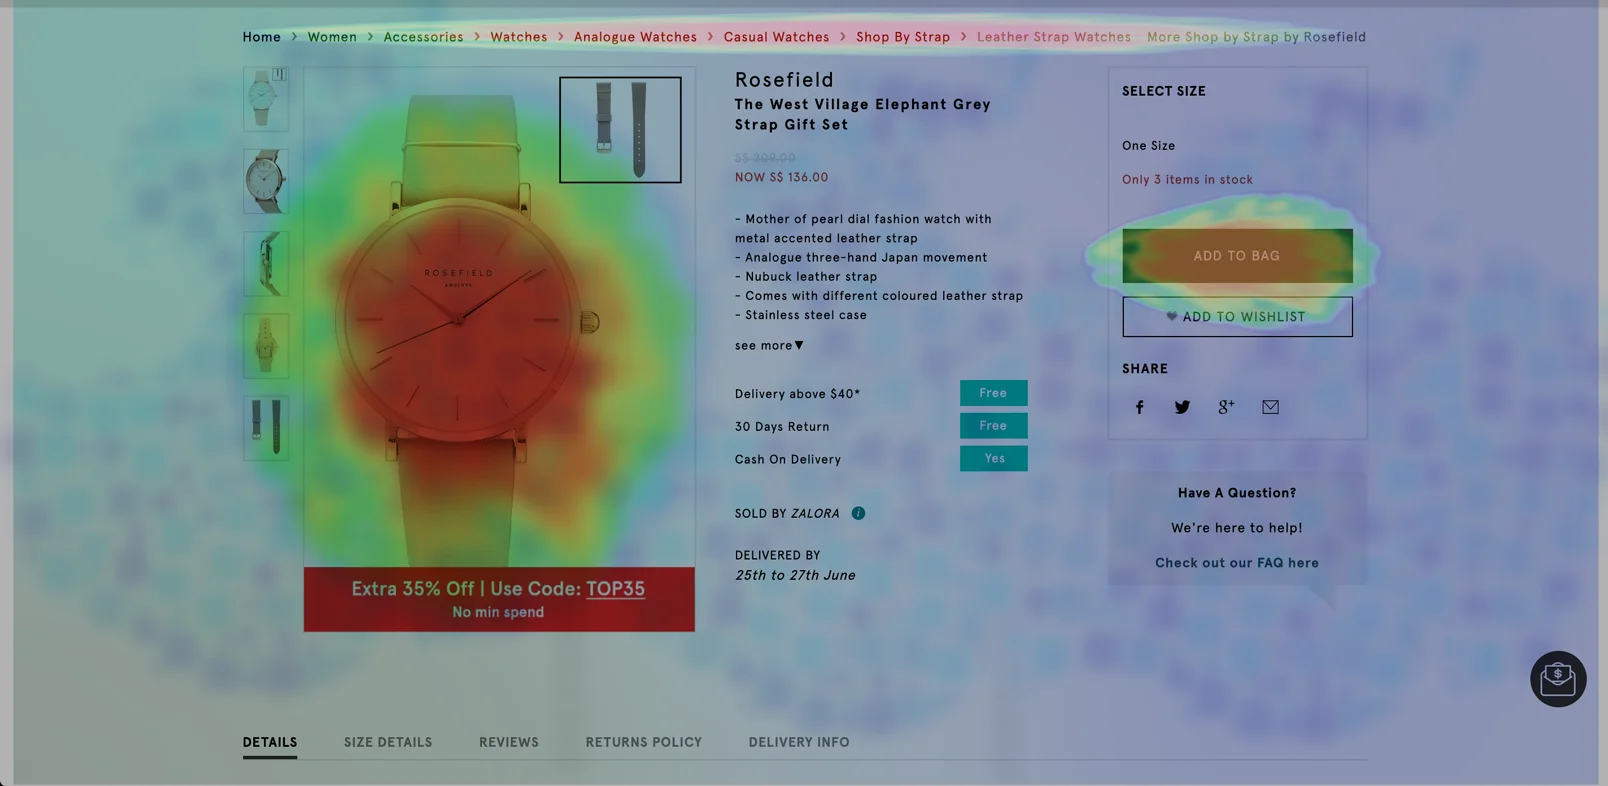 Product Page heatmap. This is why picture stories matter.